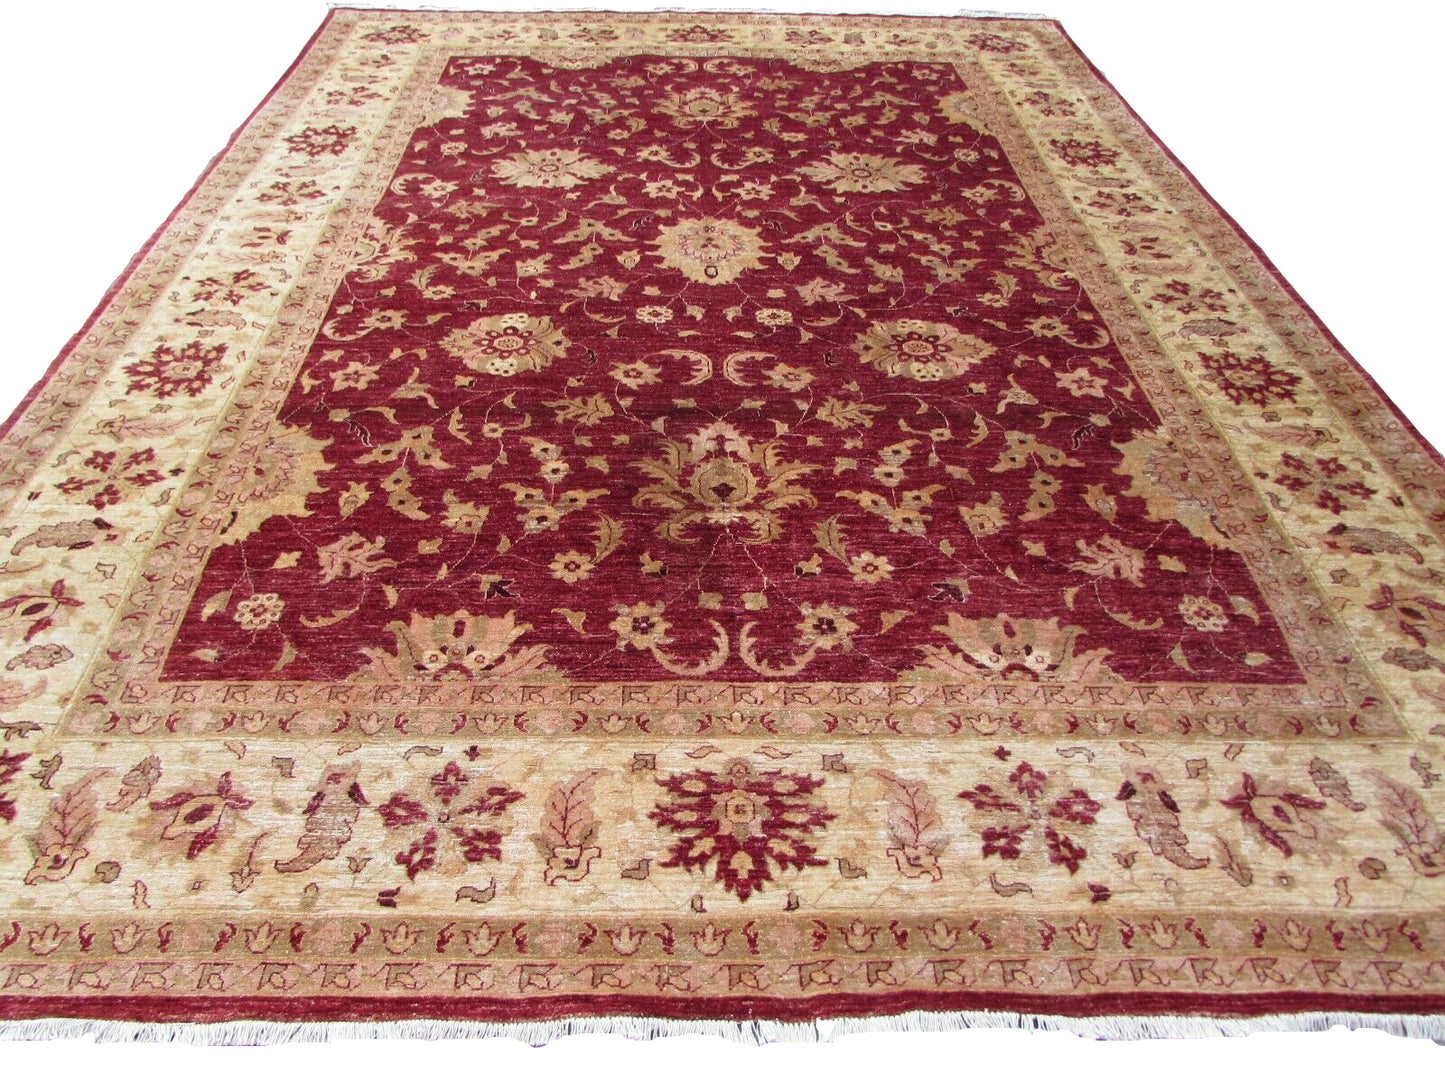 Handmade vintage Afghan Zigler rug from the 1980s made of high-quality wool with a classic Zigler pattern and background colors of ruby, beige, and olive measuring 9.7' x 12.8' (297cm x 393cm) in original good condition